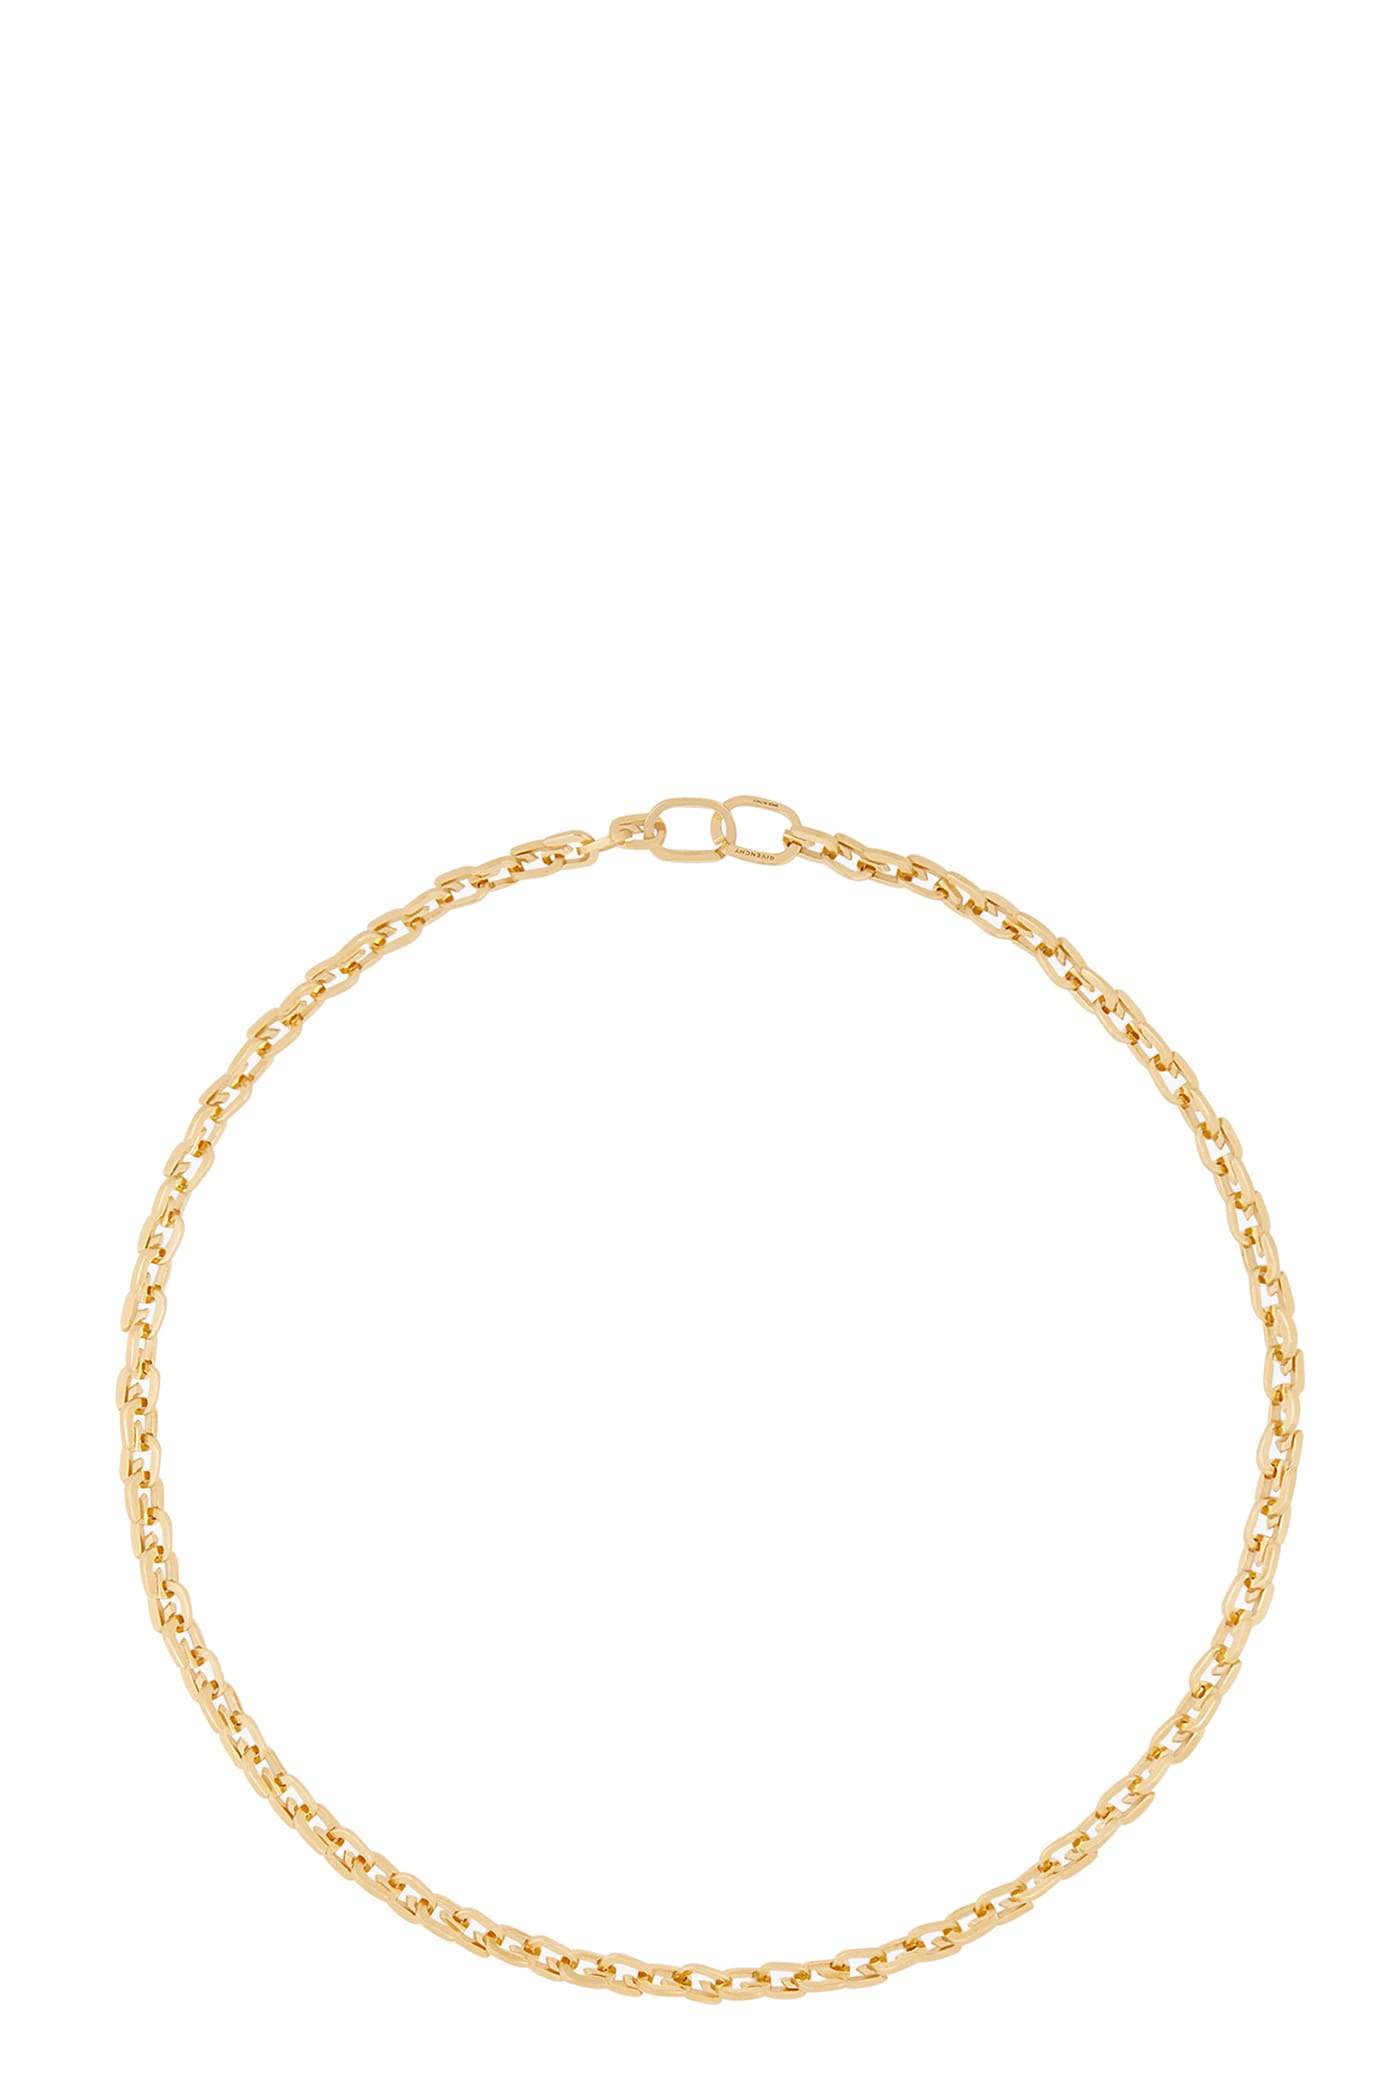 GIVENCHY JEWELRY IN GOLD METAL ALLOY,BF00B1F003710